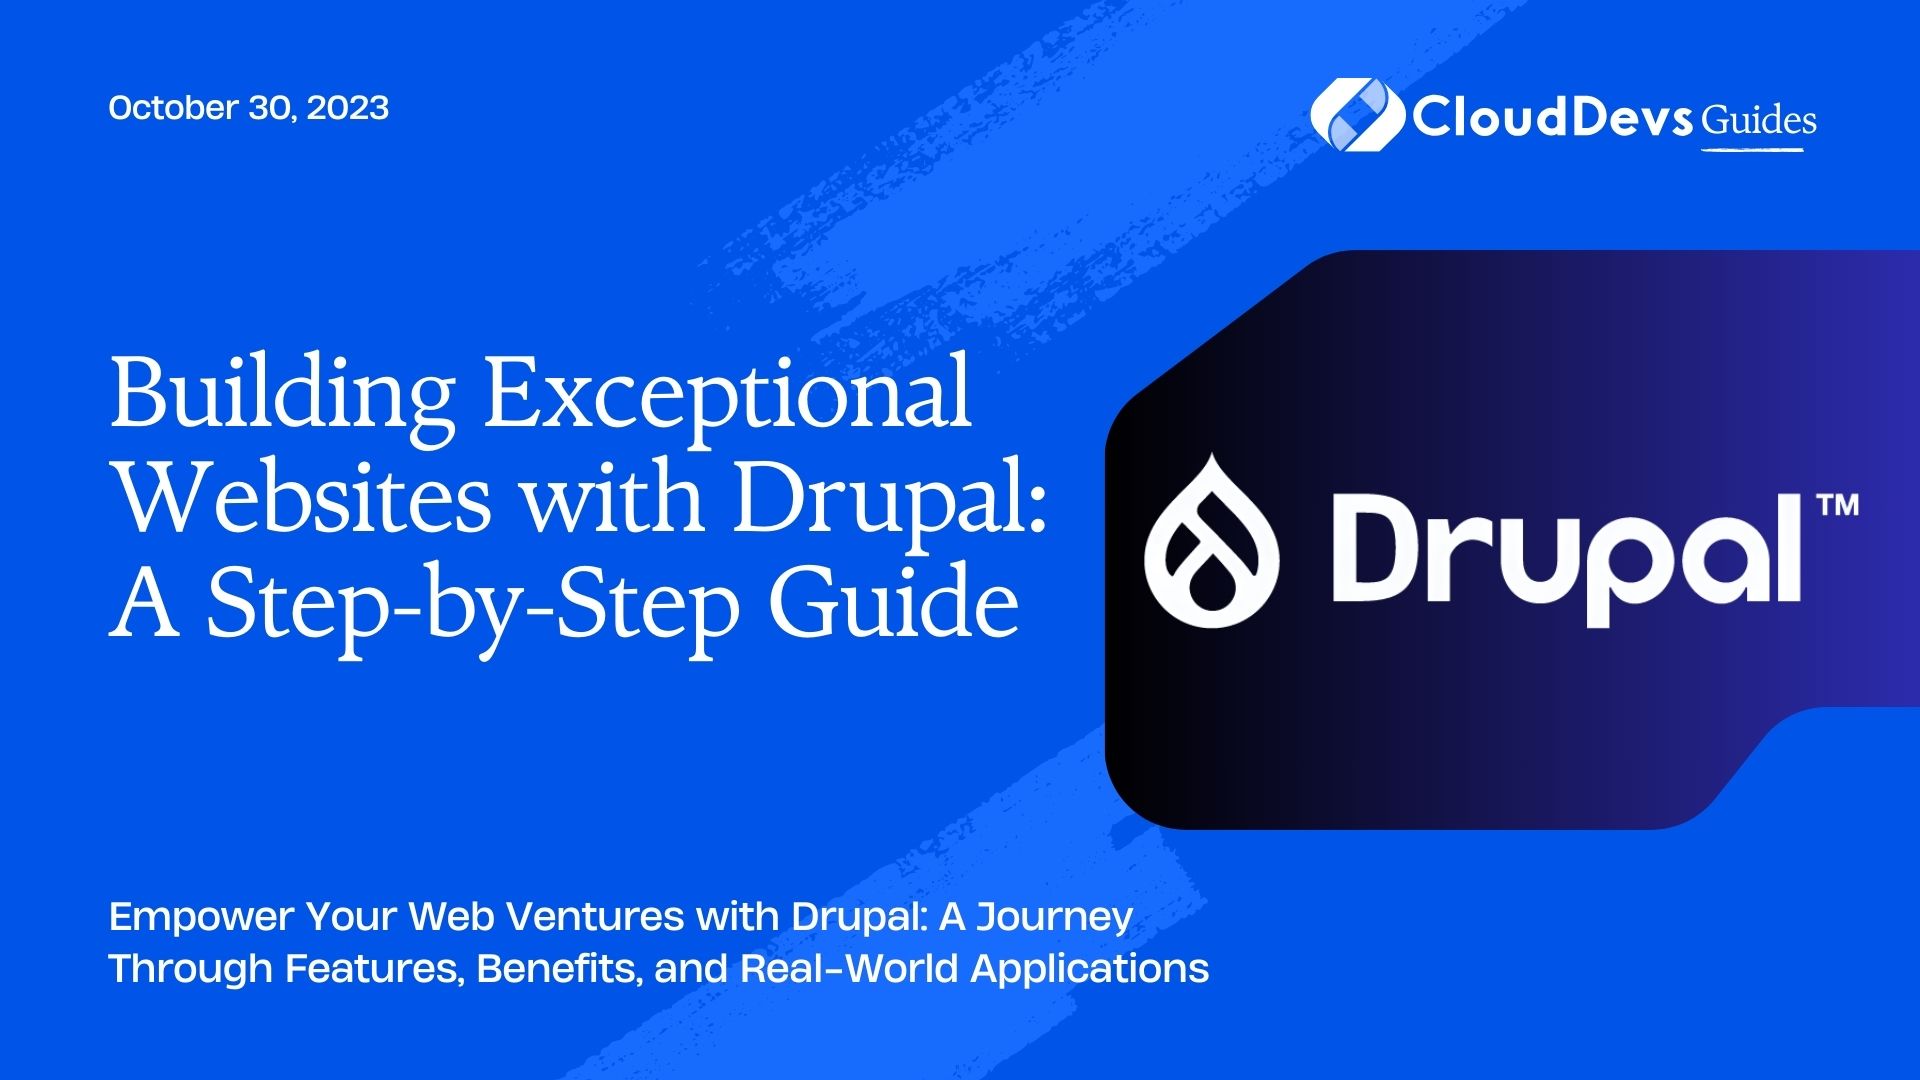 Building Exceptional Websites with Drupal: A Step-by-Step Guide